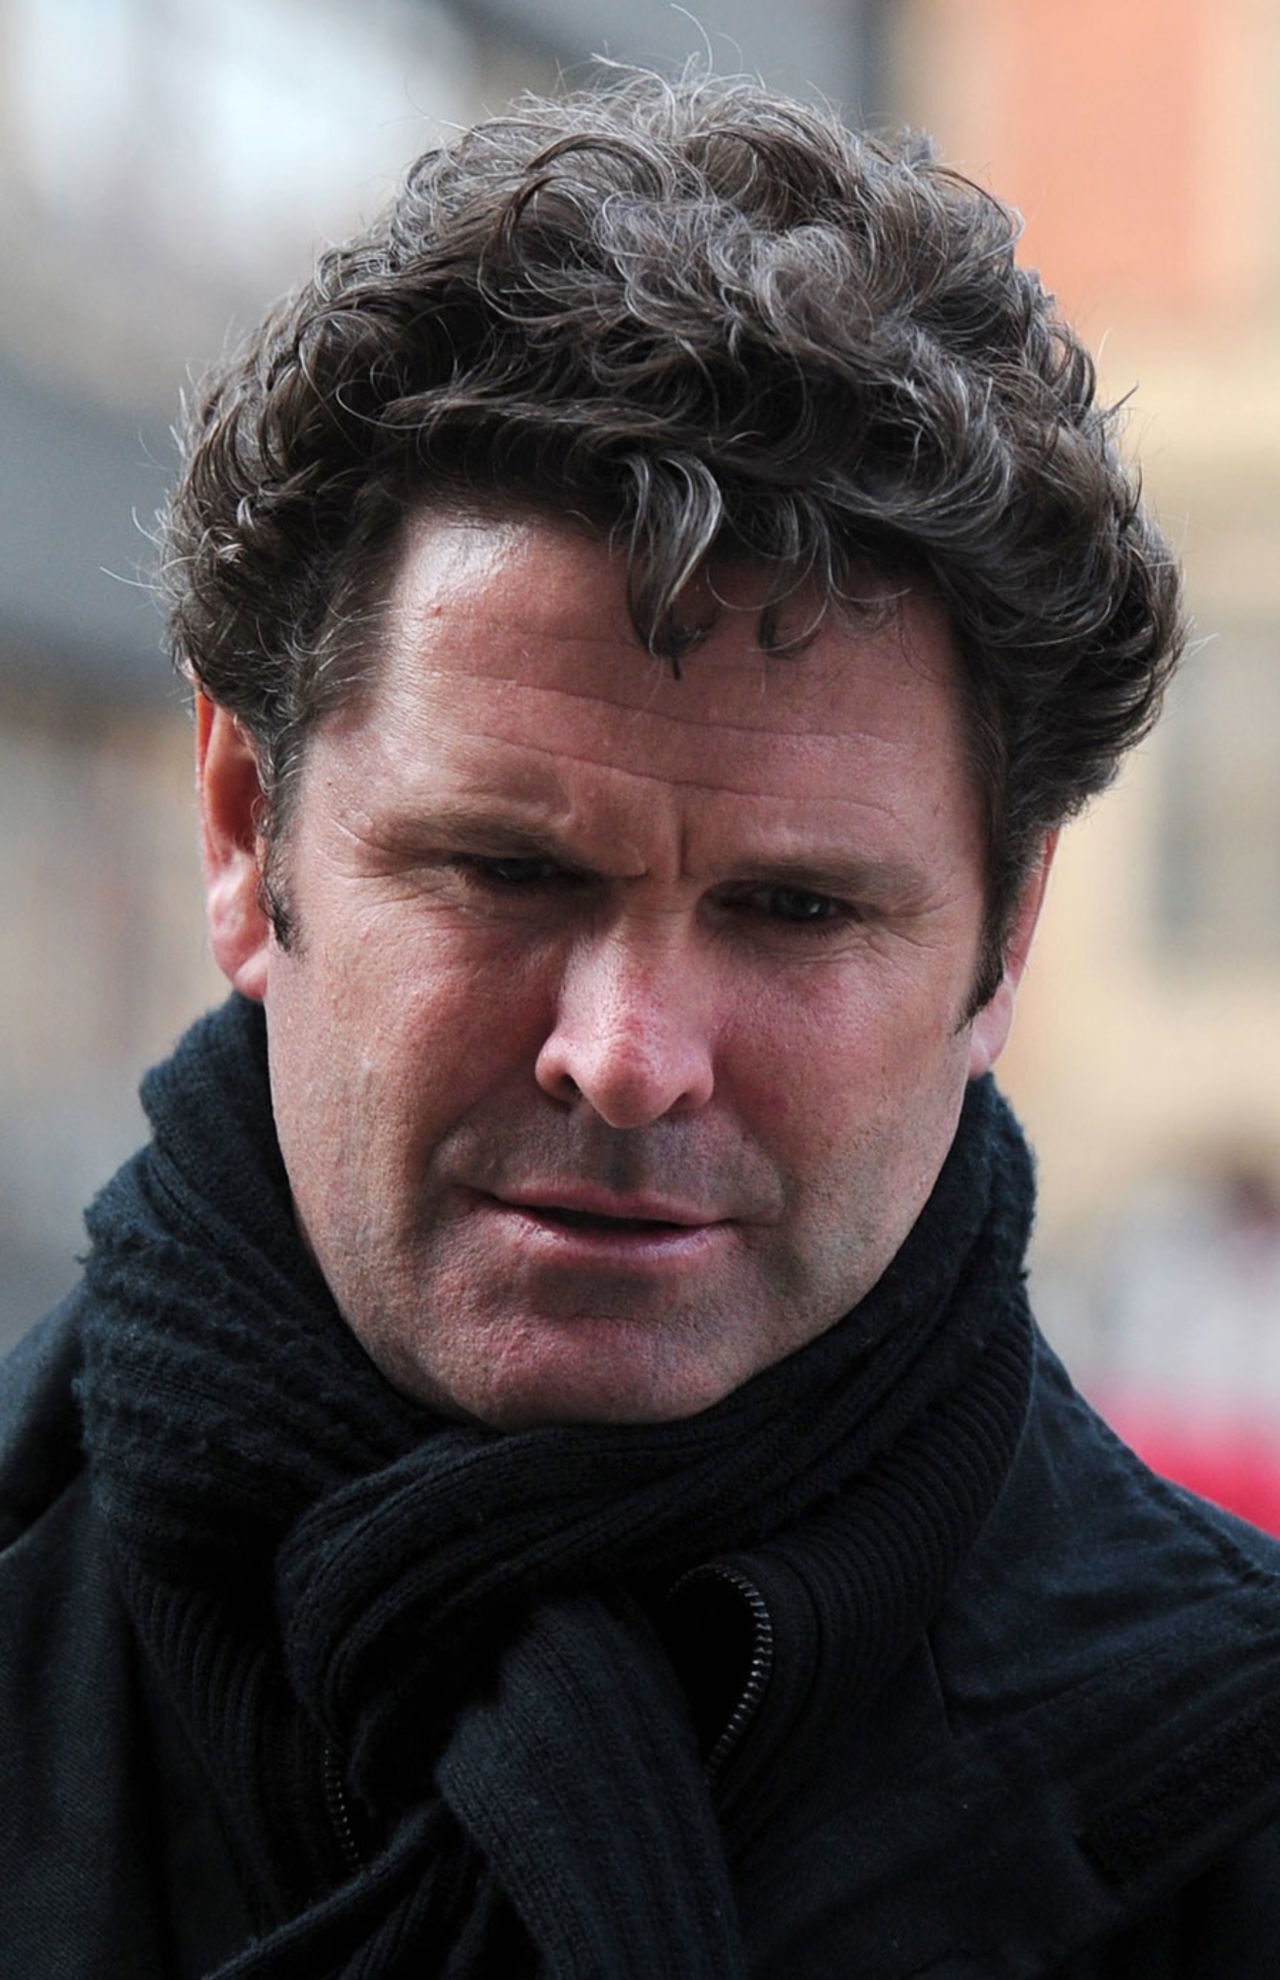 Chris Cairns is suing Lalit Modi over an allegation on twitter, London, March 5, 2012